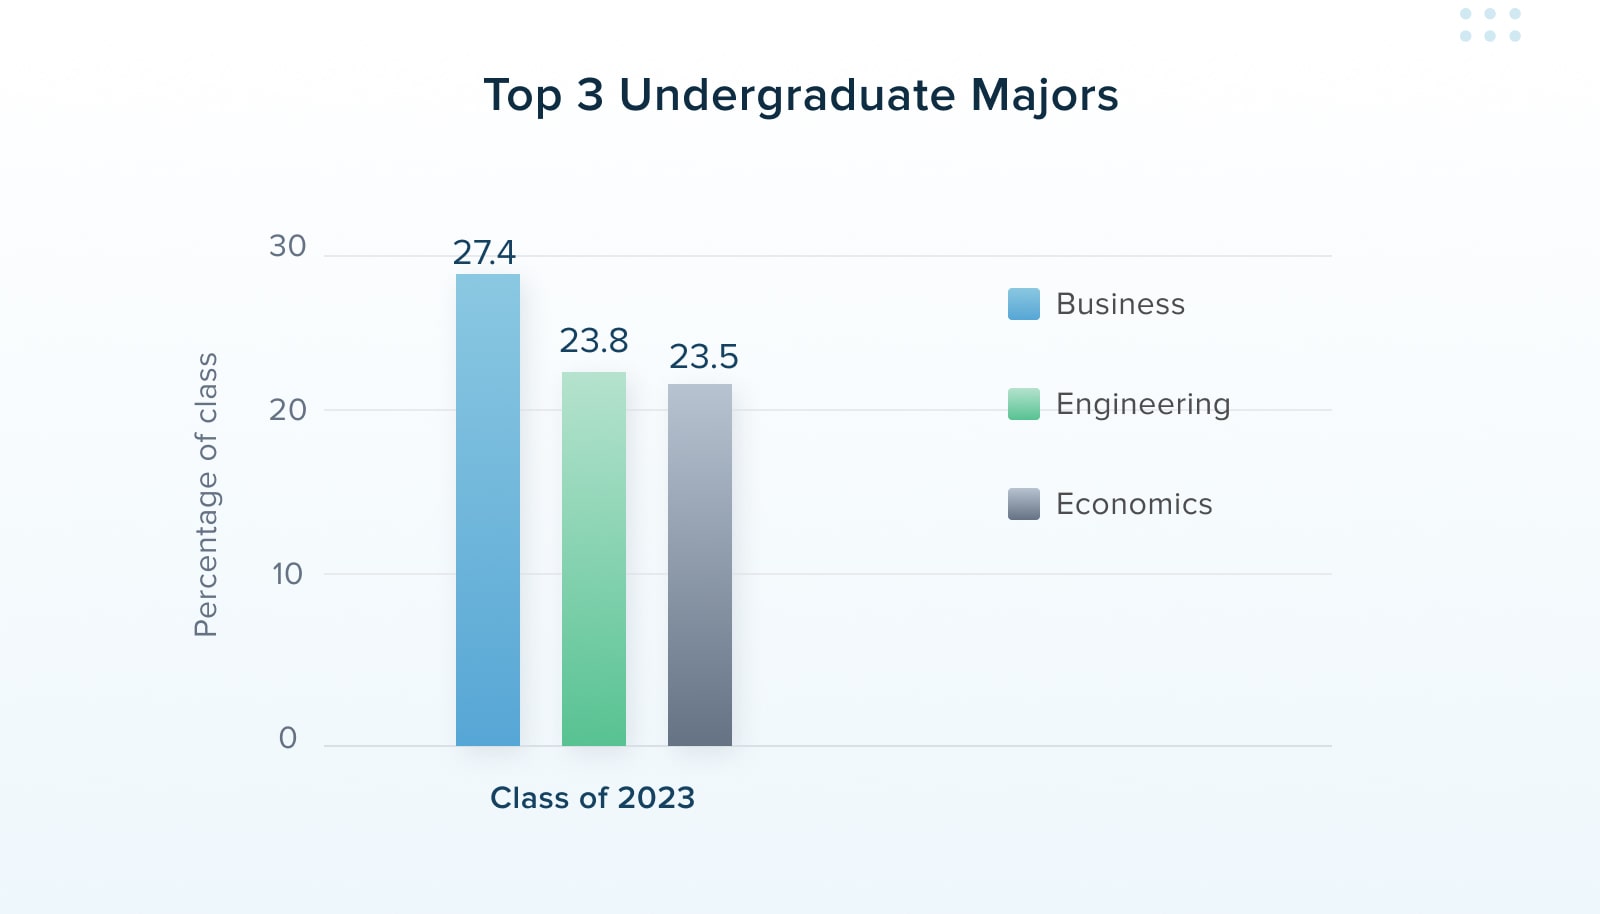 Chicago Booth MBA Class of 2023 Profile: A Class of Future